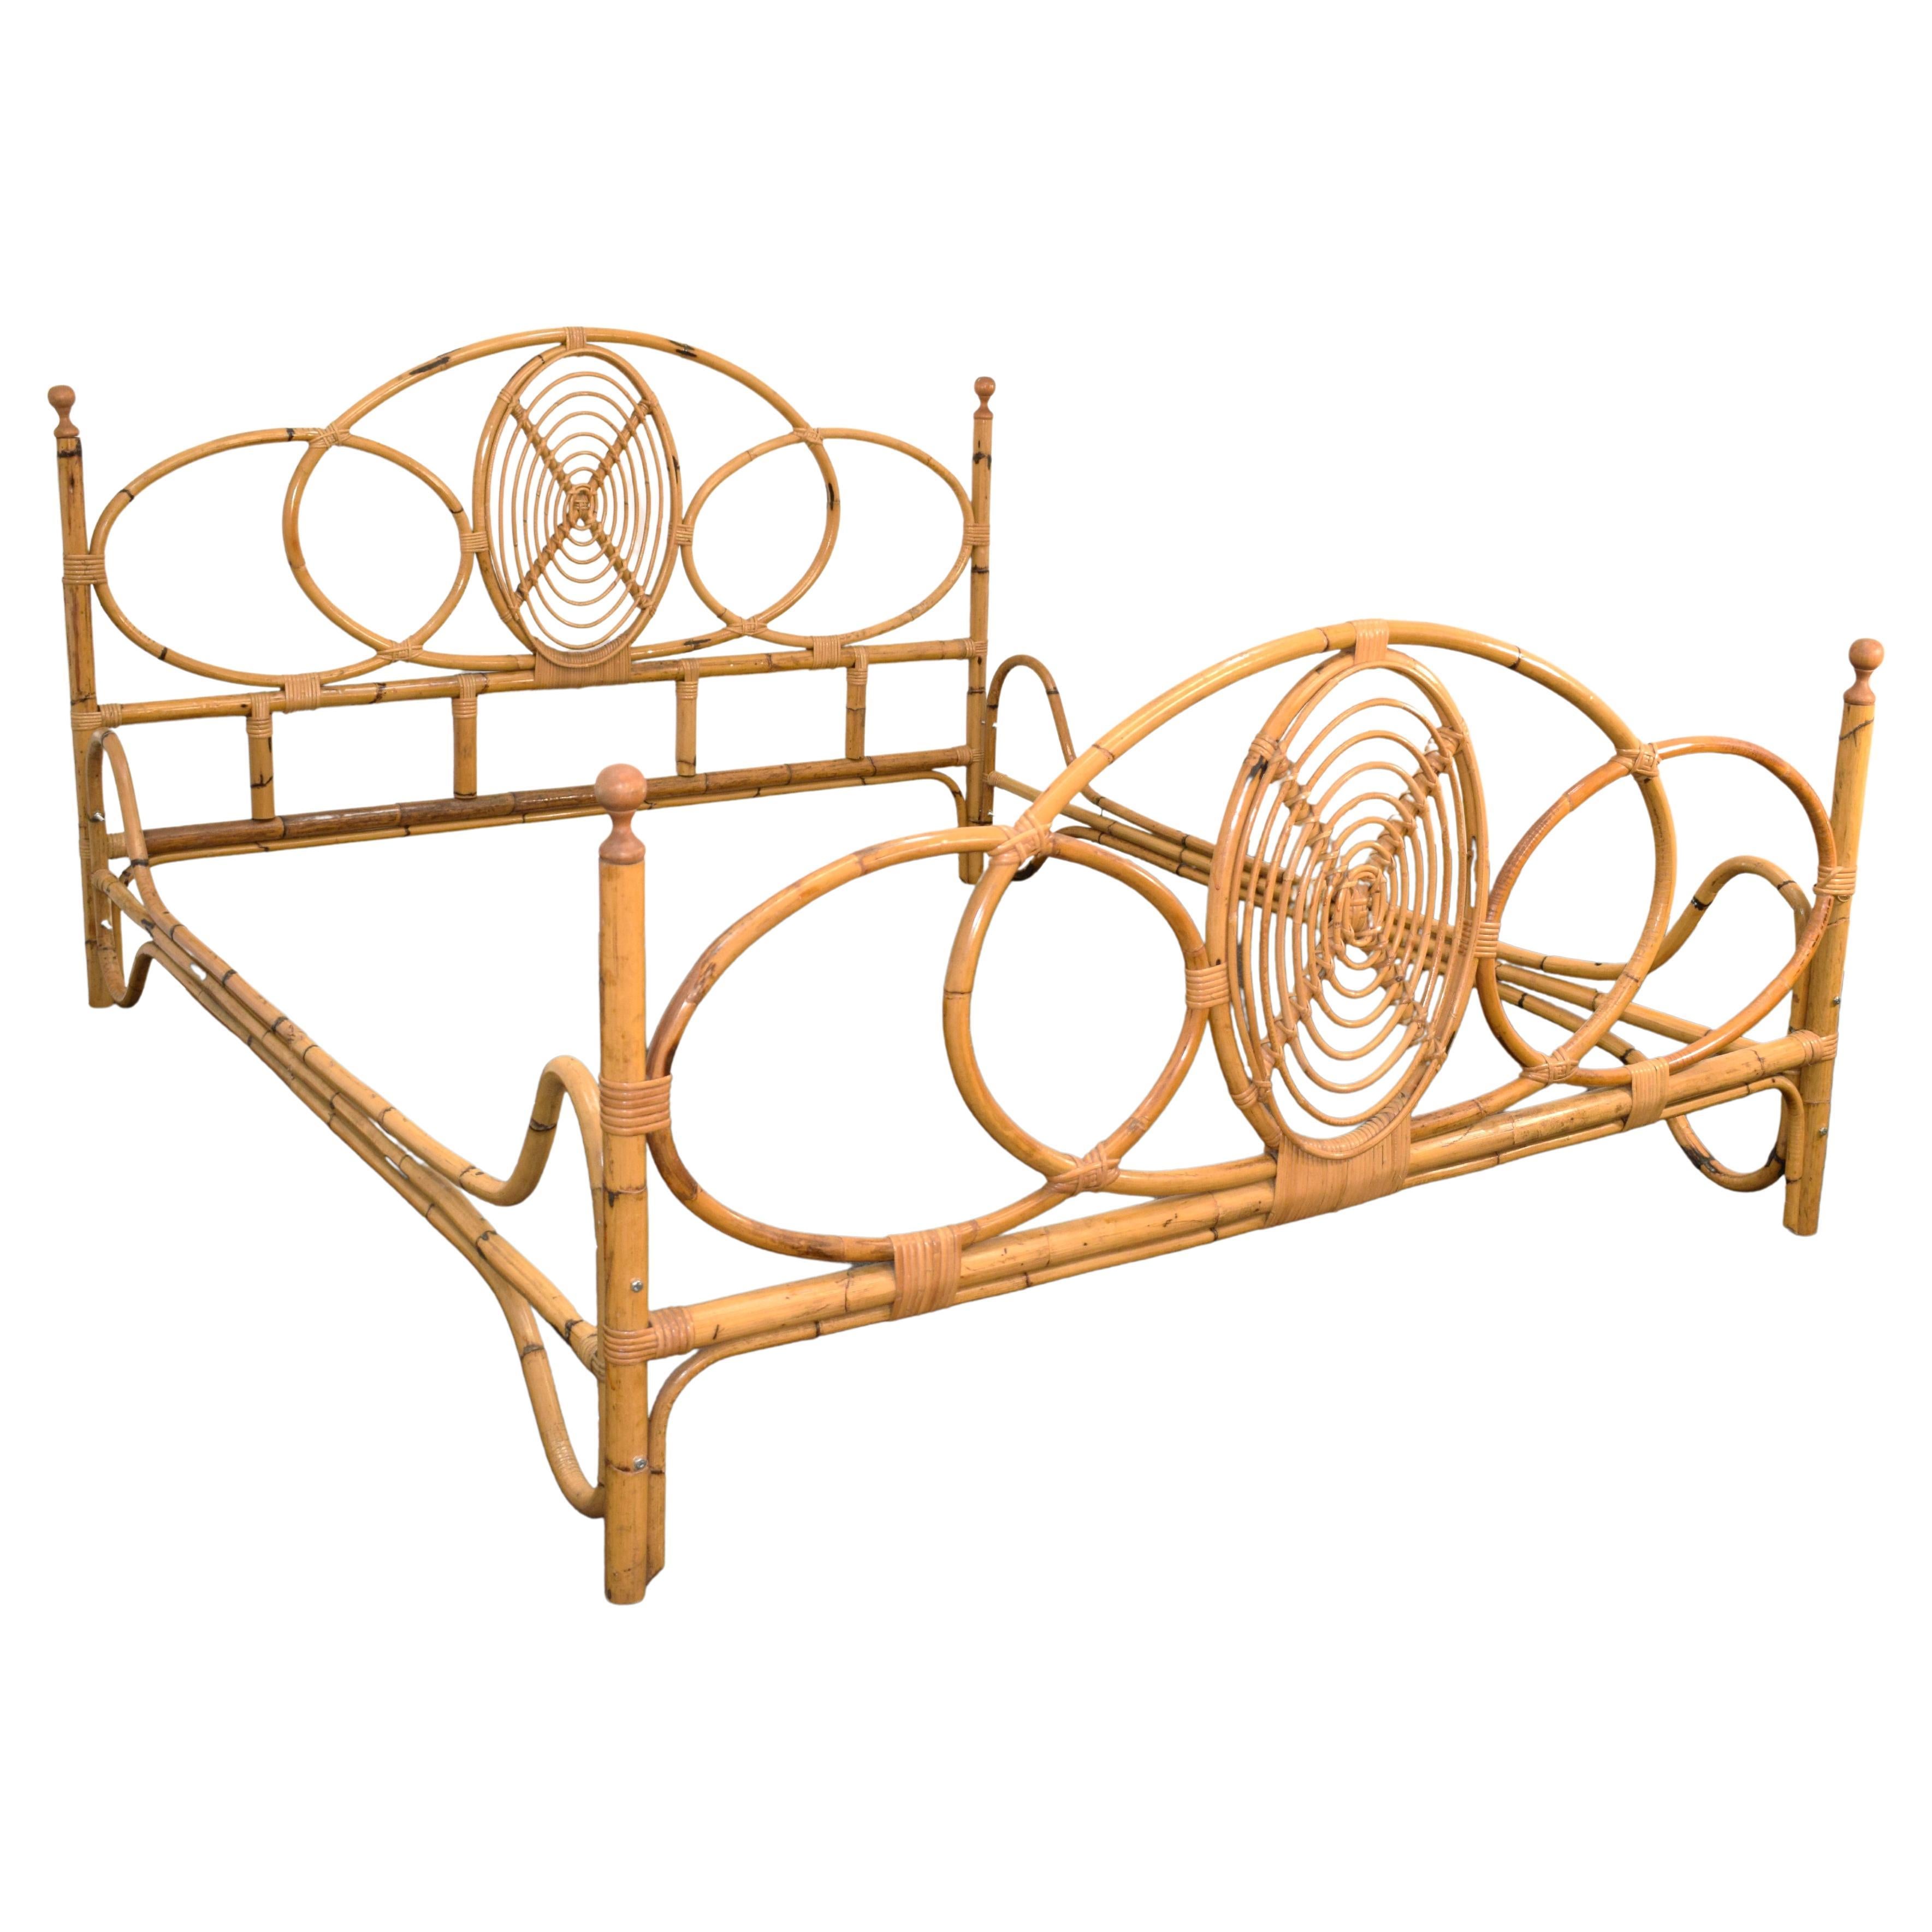 Italian Design Mid-Century Bamboo Bed, 1960s For Sale